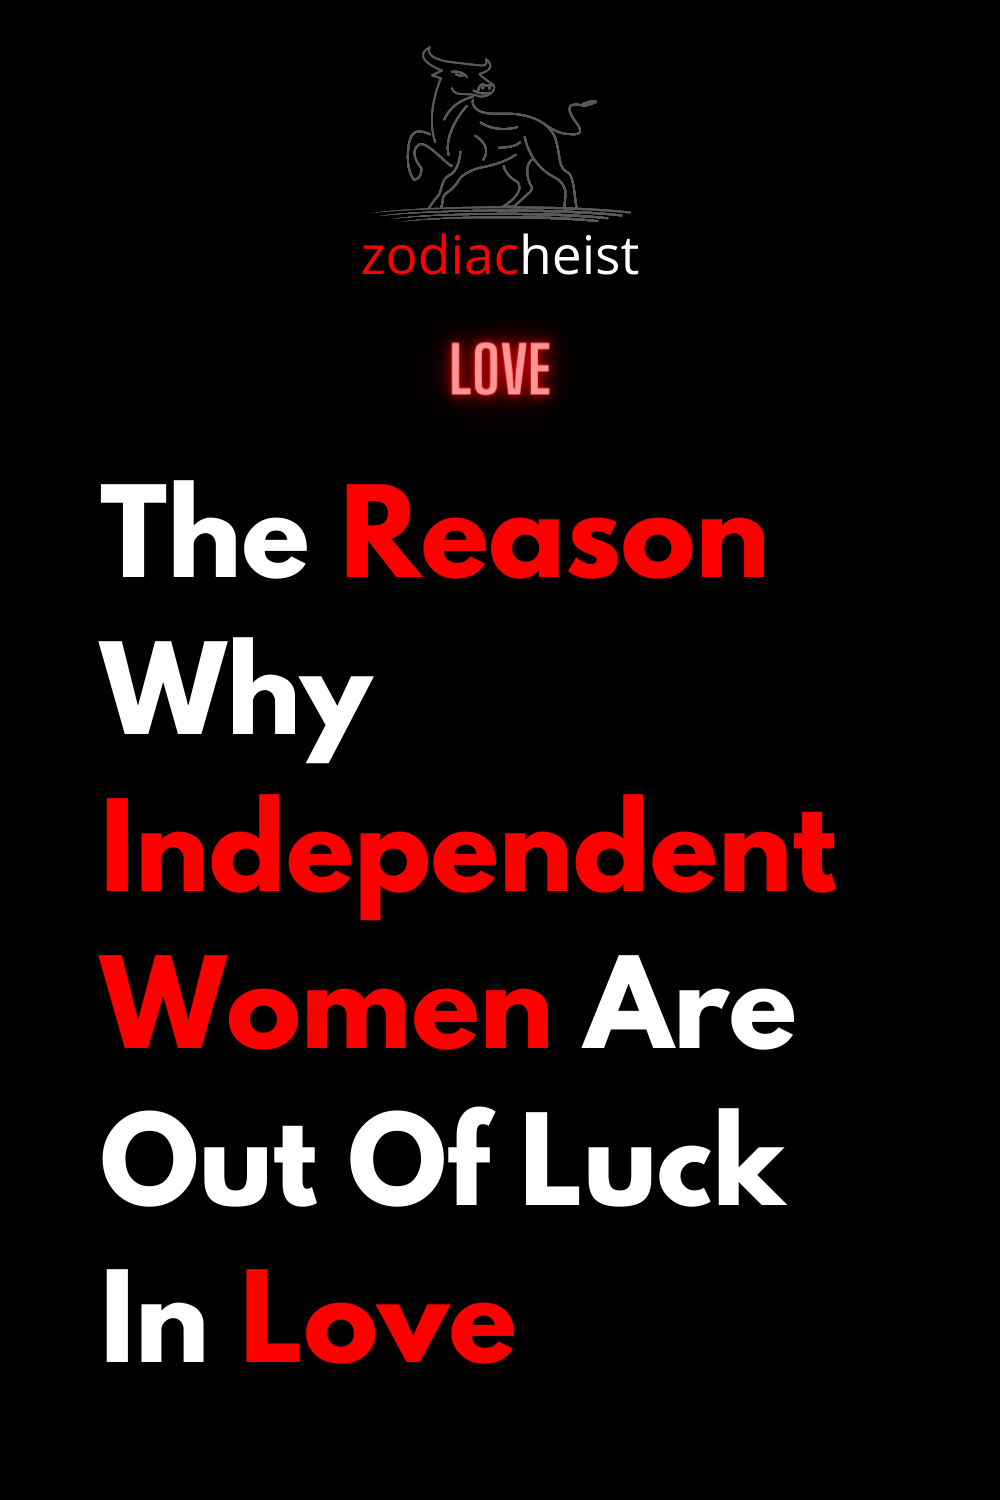 The Reason Why Independent Women Are Out Of Luck In Love